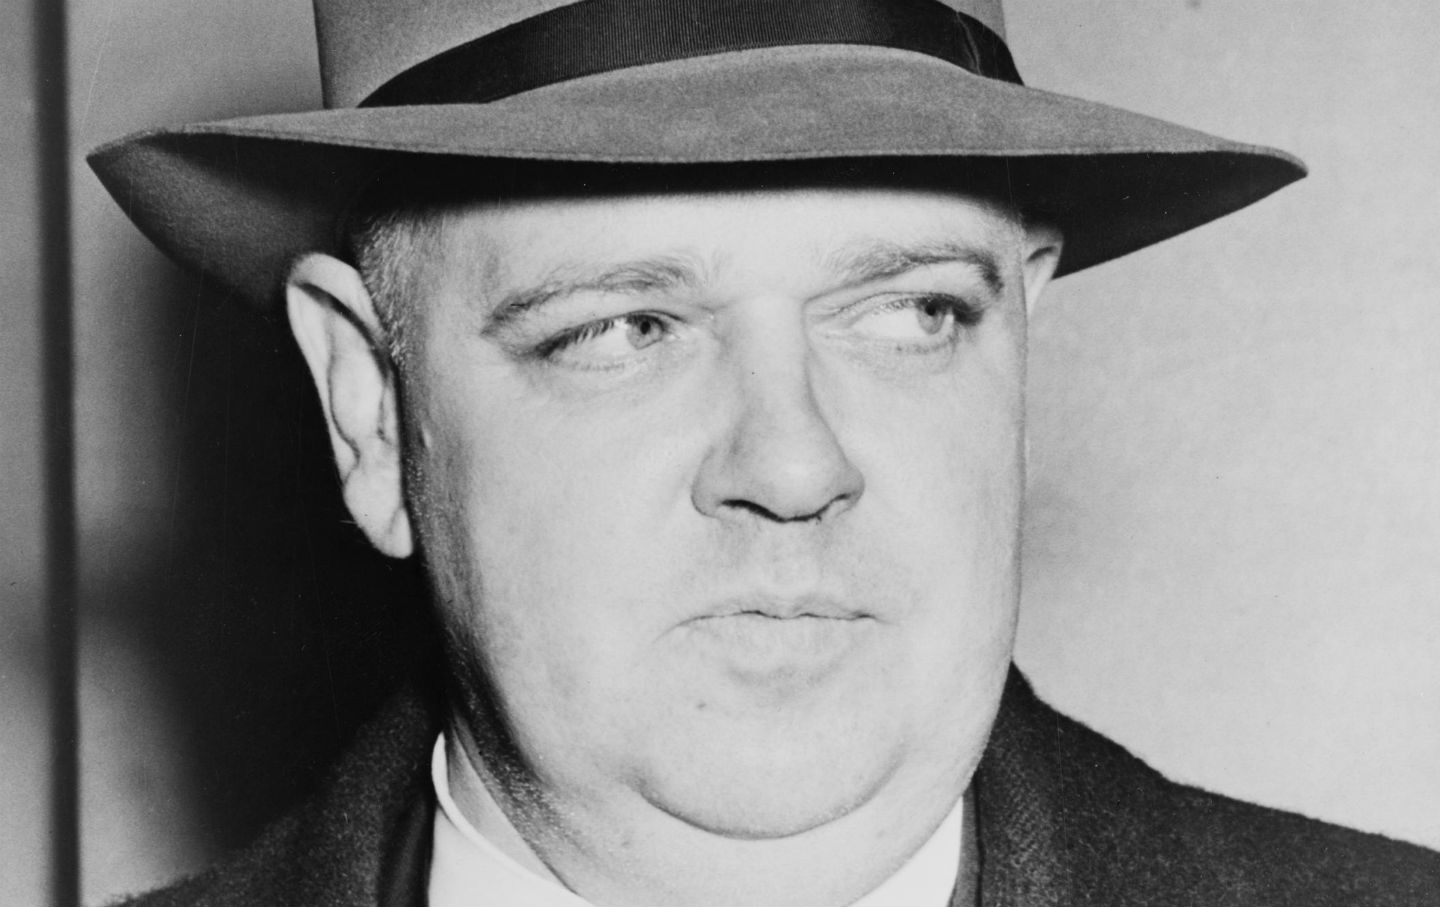 April 1, 1901: Whittaker Chambers Is Born